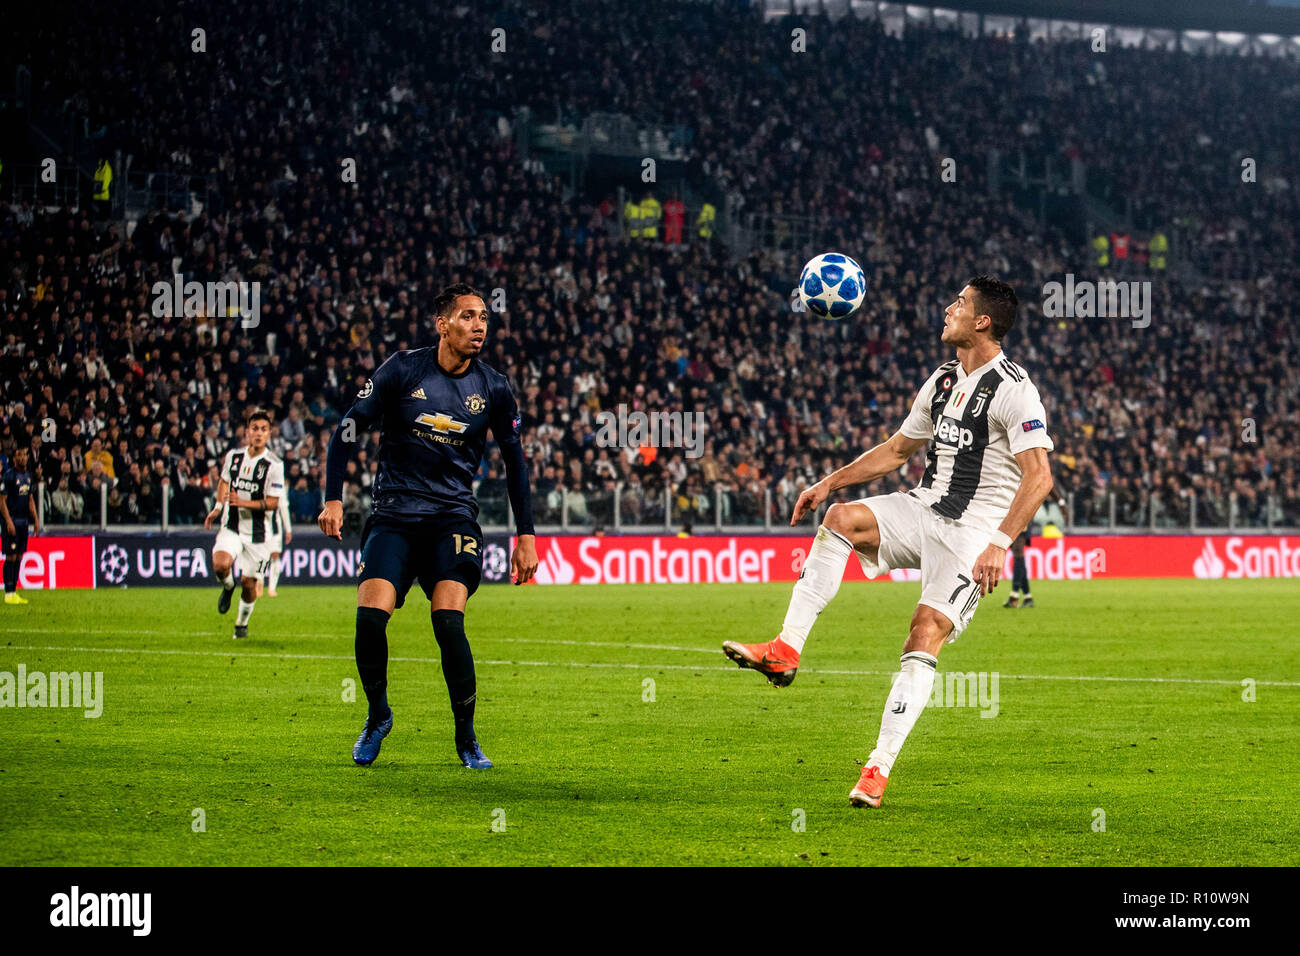 Turin, Italy. 07th Nov, 2018. Cristiano Ronaldo of Juventus during the UEFA Champions League match between Juventus and Manchester United at the Allianz Stadium, Turin, Italy on 7 November 2018. Manchester United won 1-2 Credit: Alberto Gandolfo/Pacific Press/Alamy Live News Stock Photo